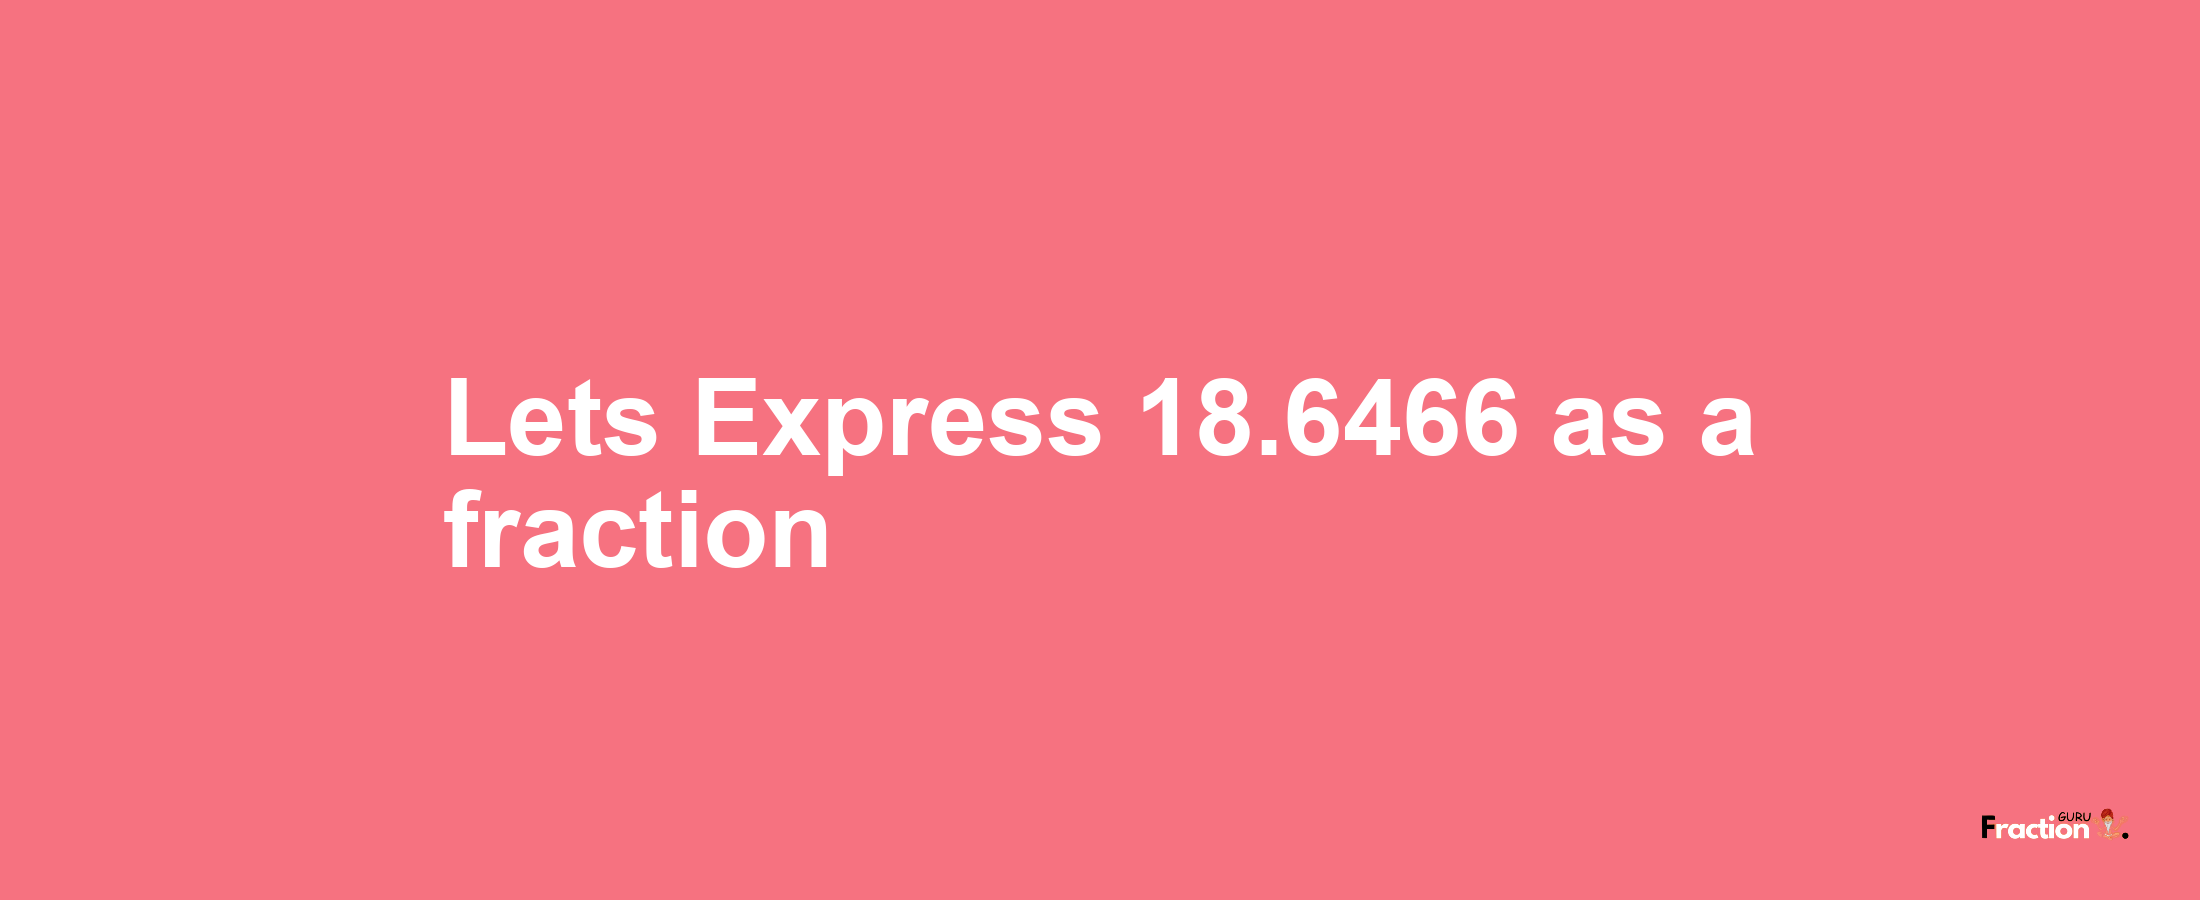 Lets Express 18.6466 as afraction